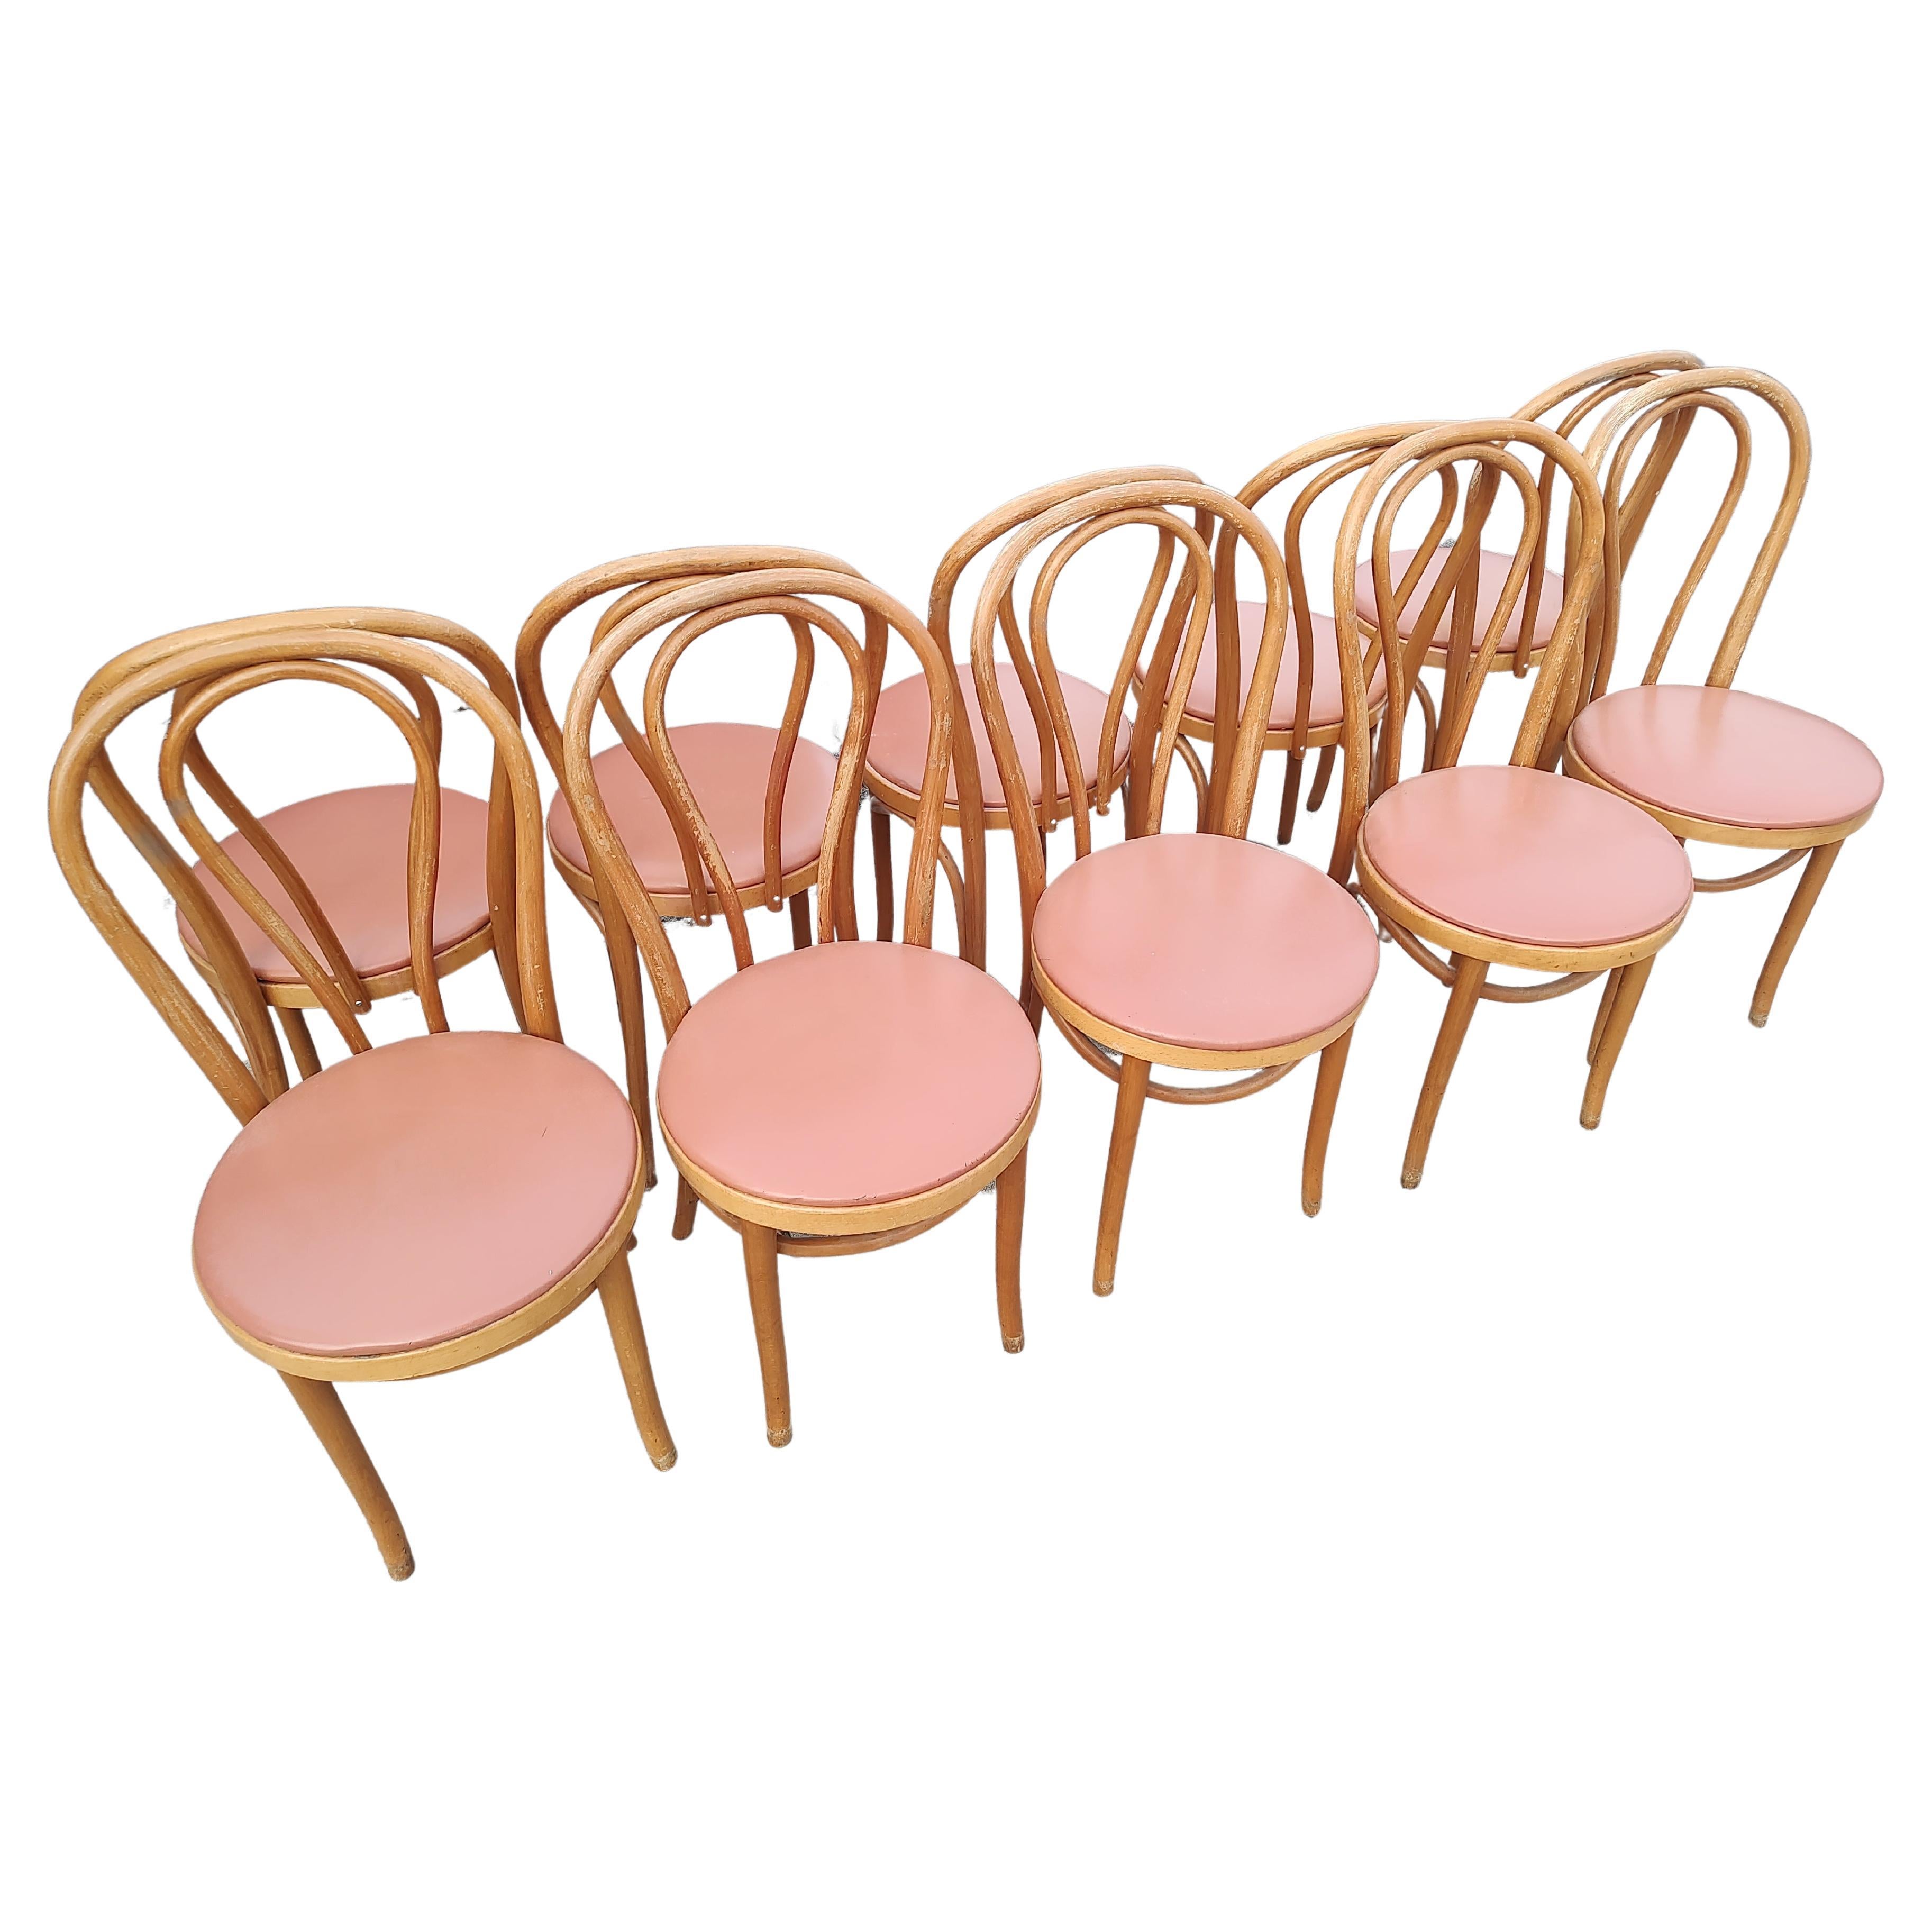 Fabulous set of Ten, 10 beech bentwood cafe style chairs made in Romania c1970. Vinyl seats in excellent vintage condition with minimal wear, no tears or rips, be very little wear. Some minor wear to the finish of the wood, no breaks or damage. Very